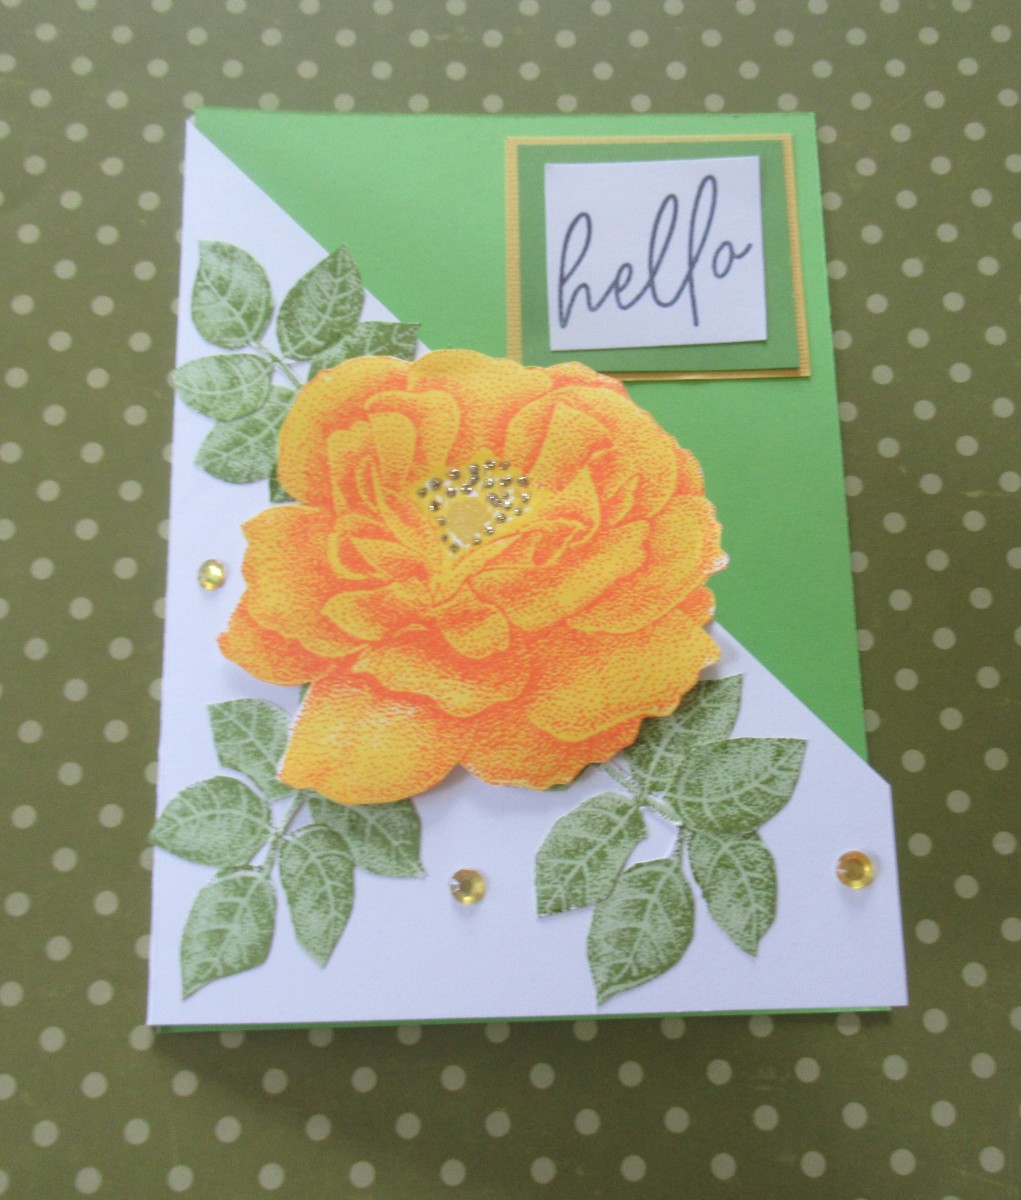 Tips For Making Better Greeting Cards